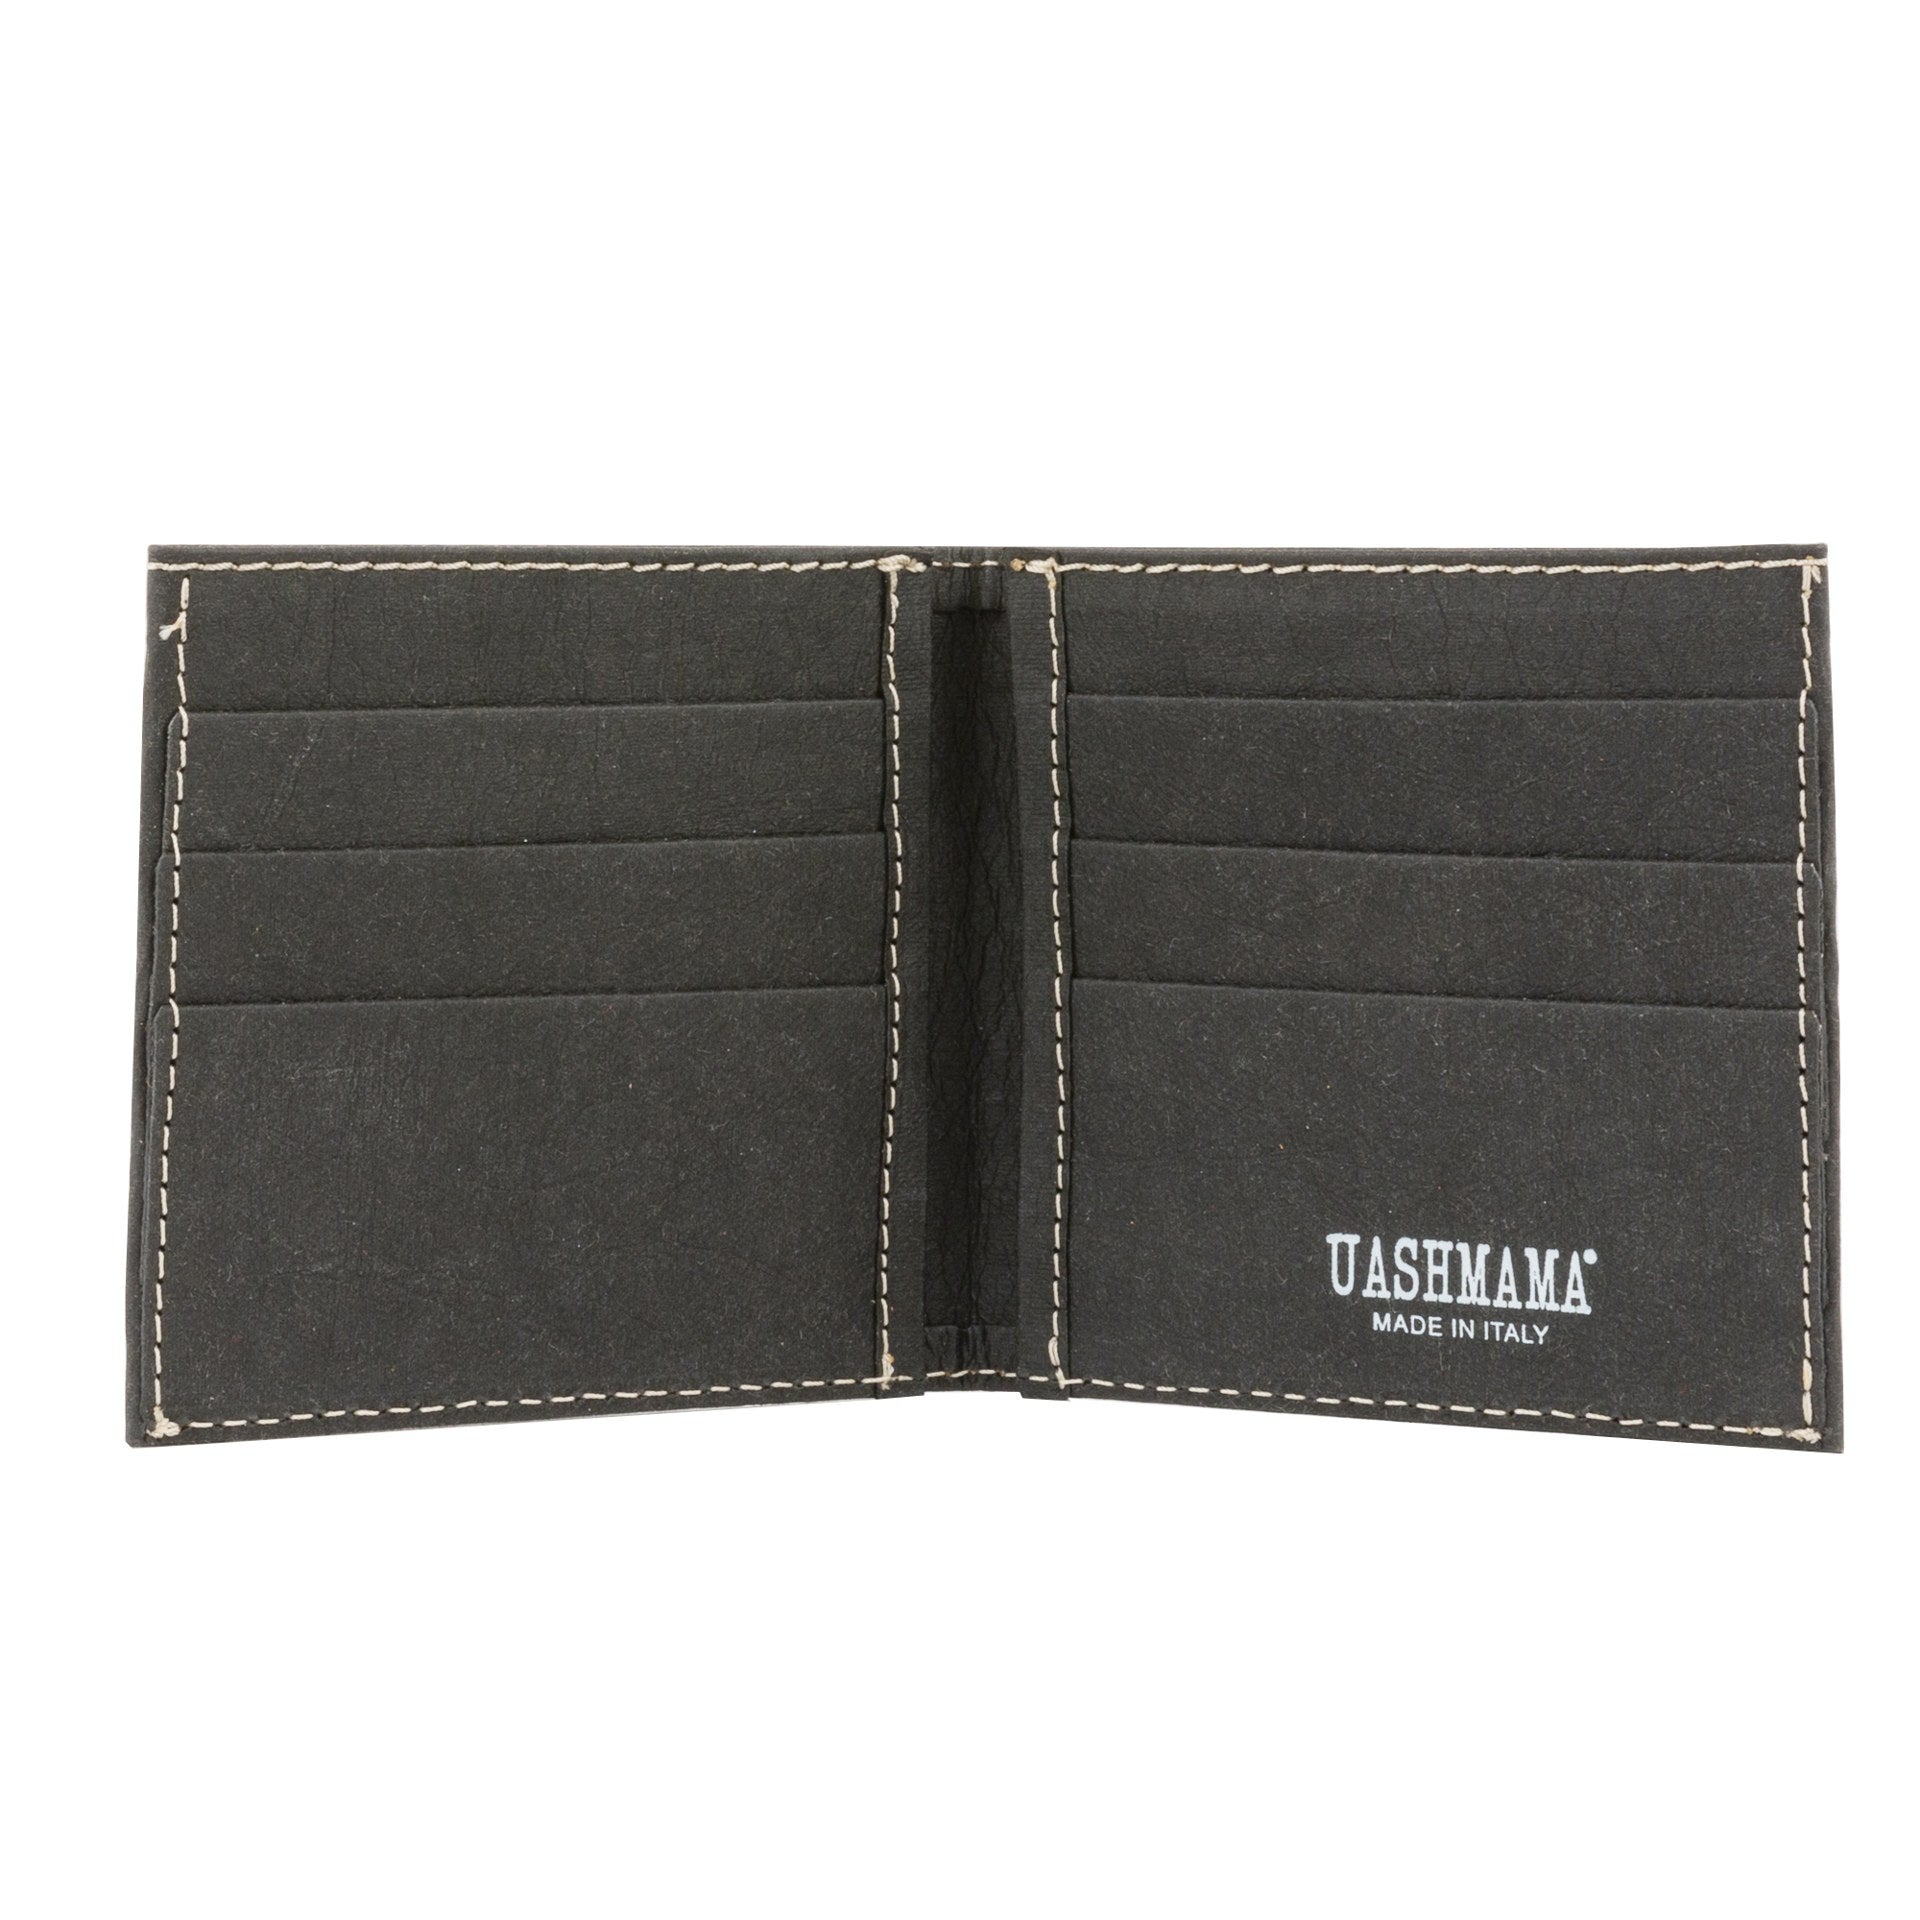 Uashmama Small Paper Fold Over Wallet | Credit Card Holder